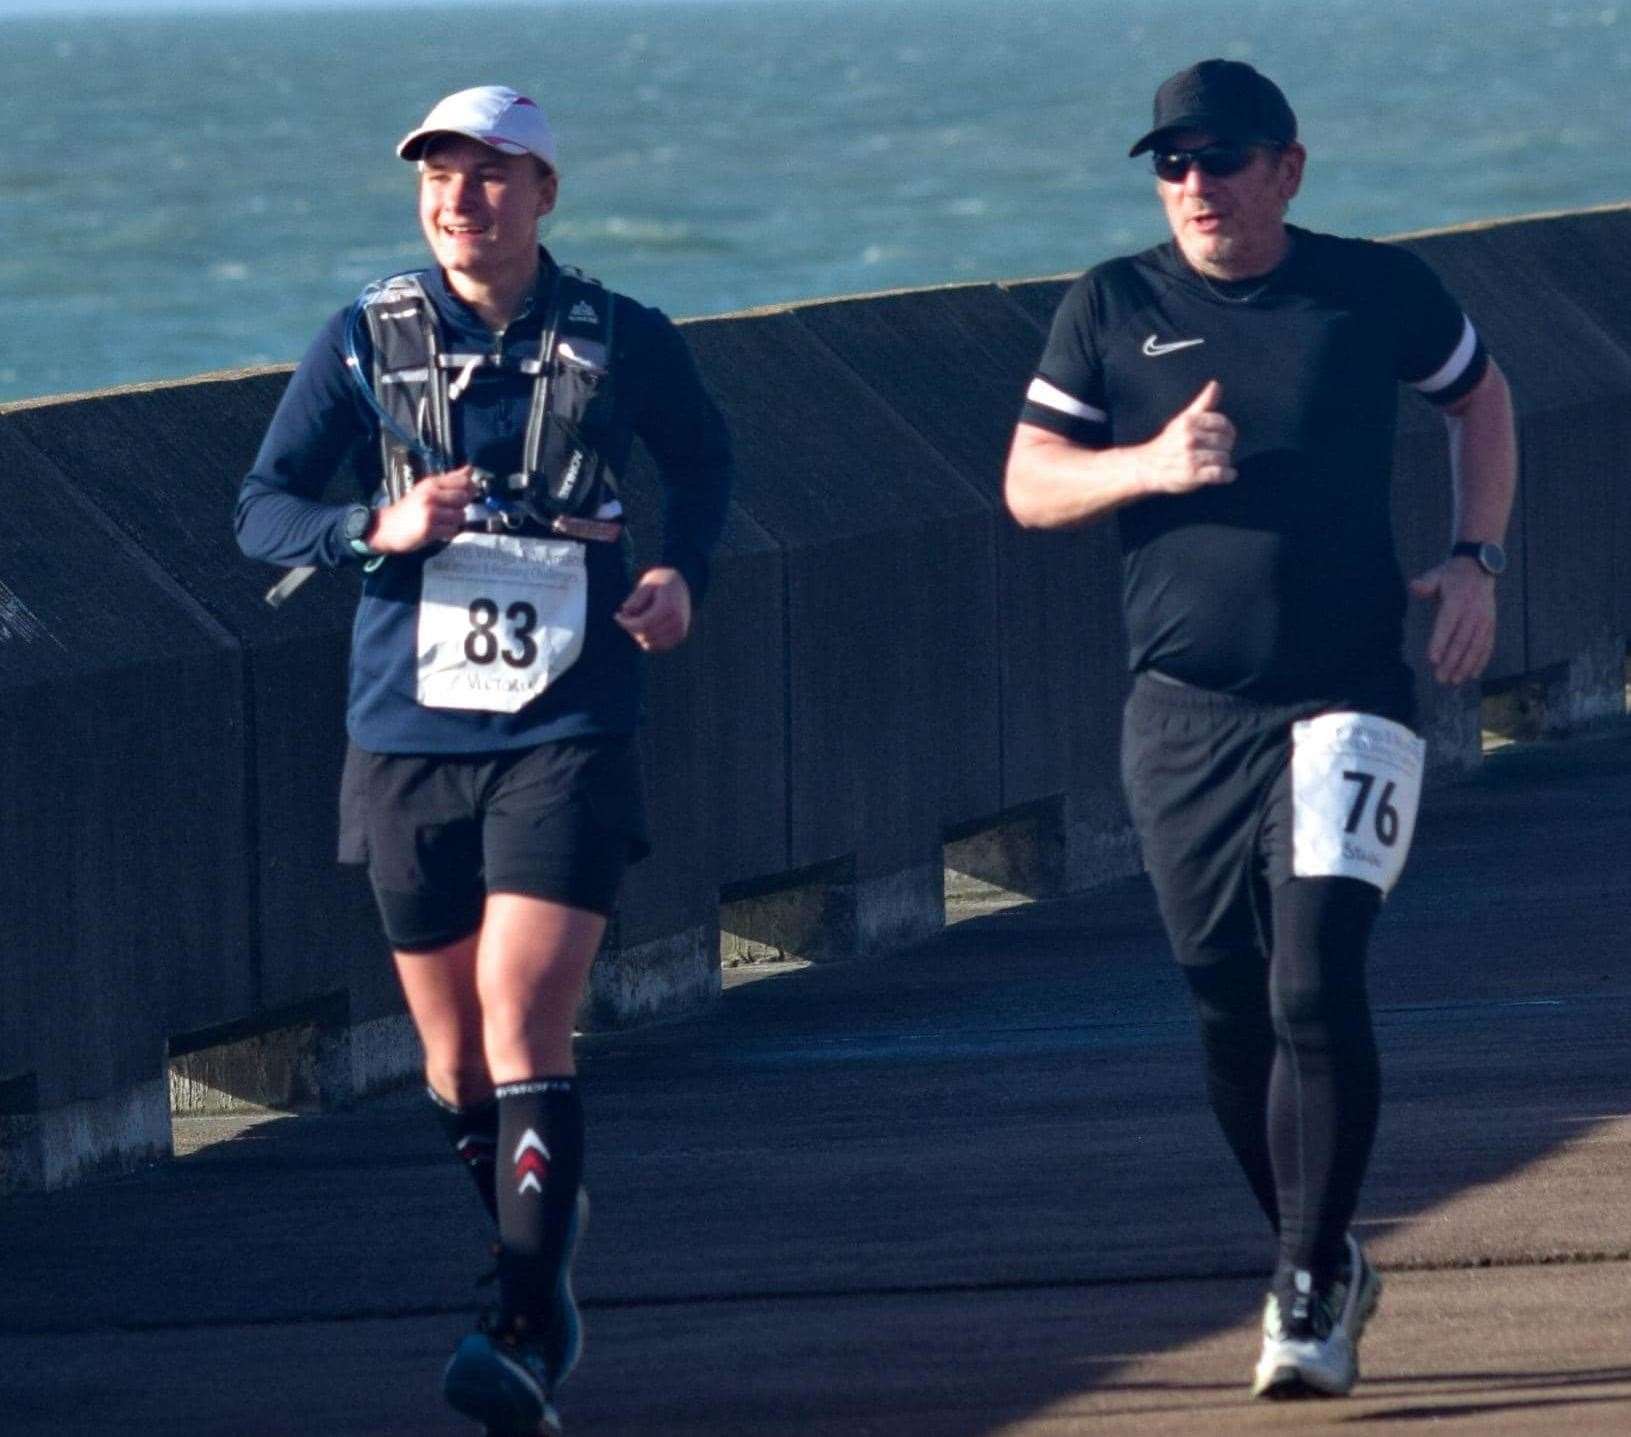 Steve Bush running with Victoria Ward at Samphire Hoe moments before he collapsed Picture: Blackswan Photography